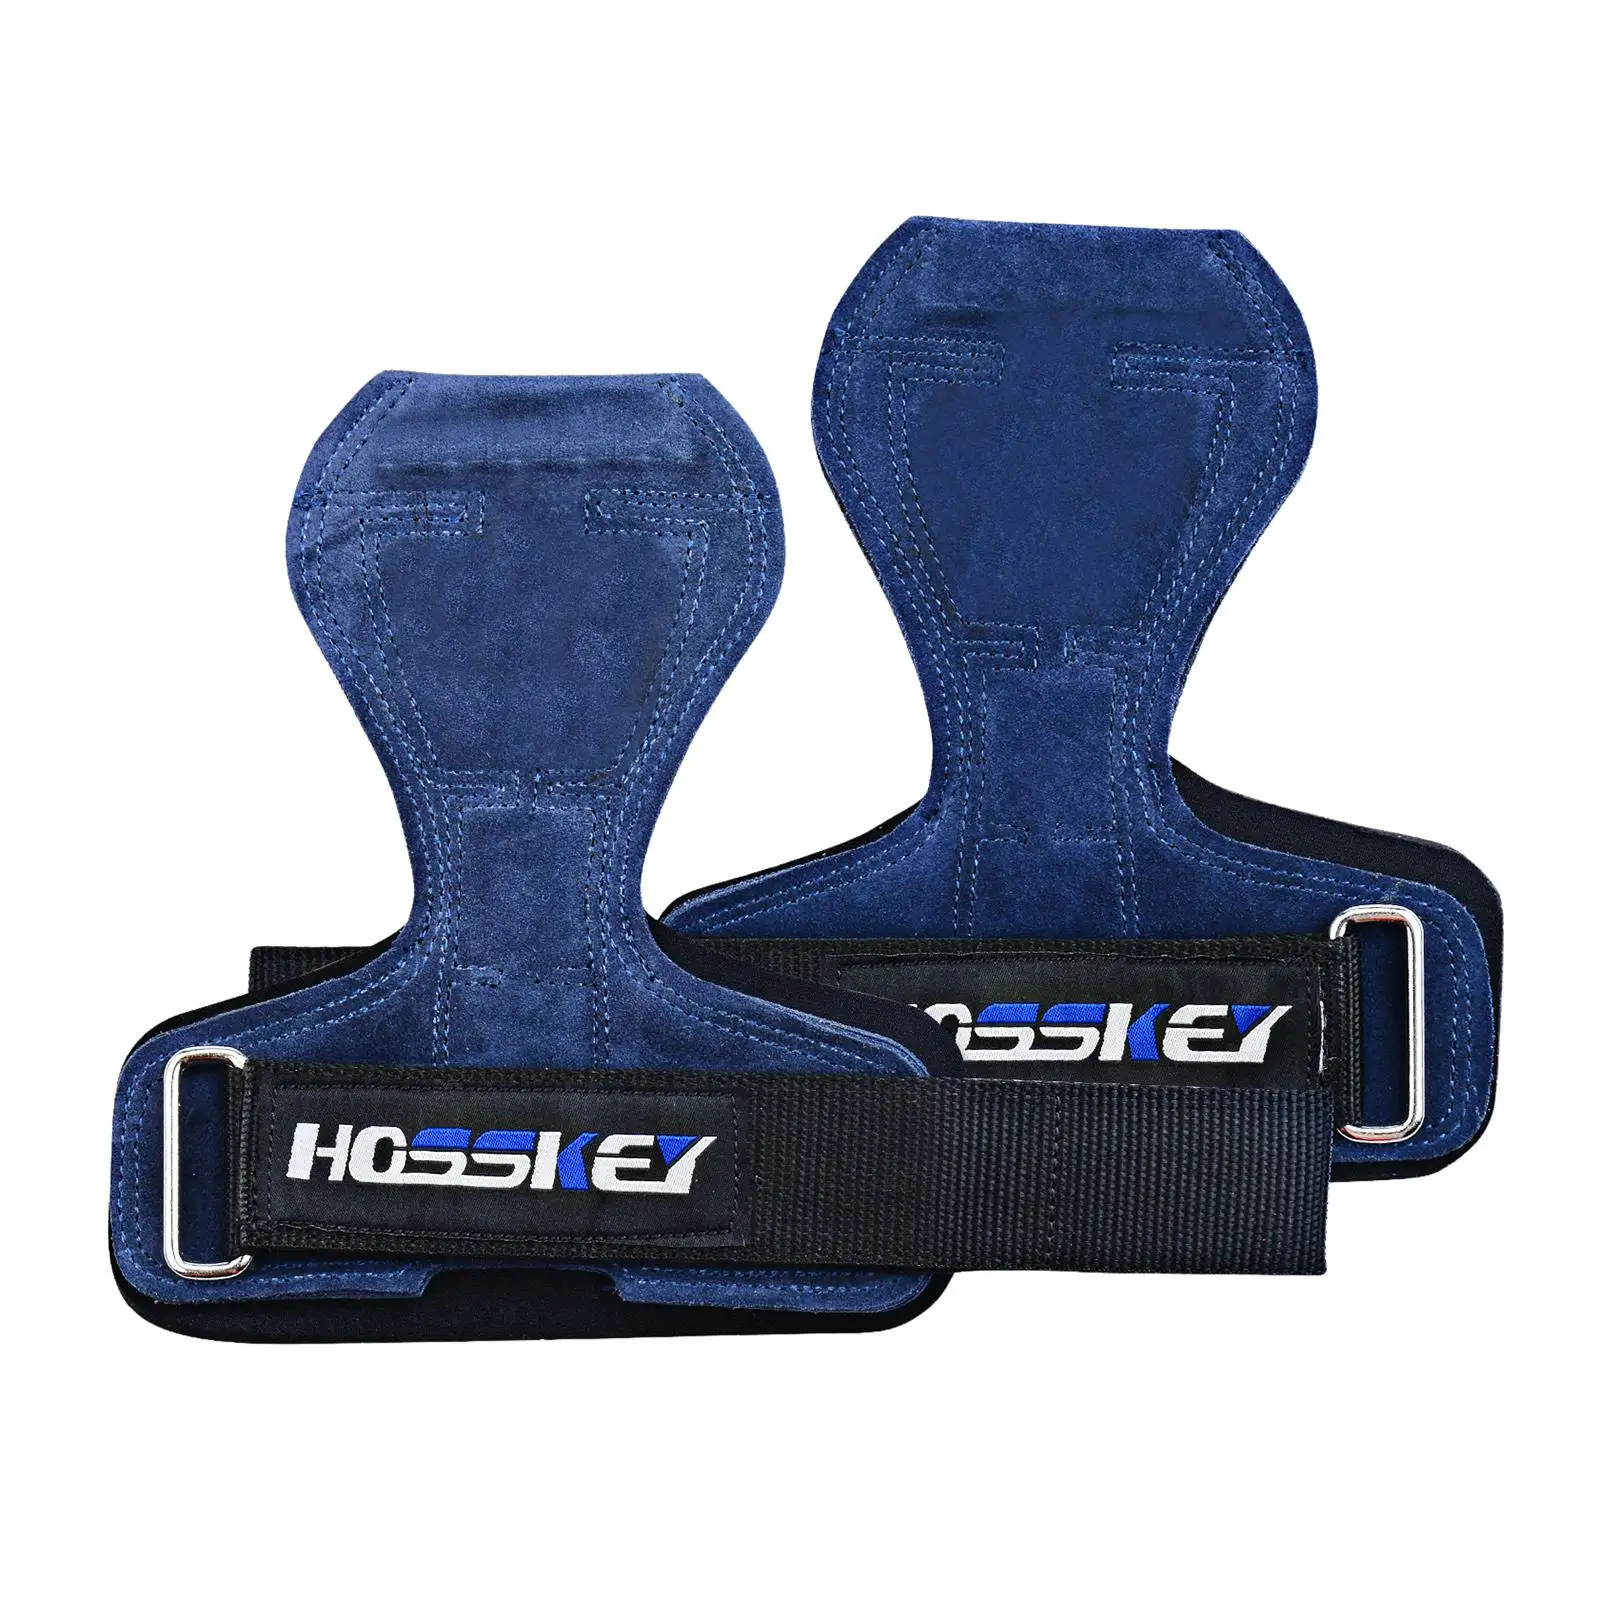 1 Pair Leather Weight Lifting Hooks Grips Straps Up Deadlift Strength Training Gym Fitness Wrist Support Lift Straps